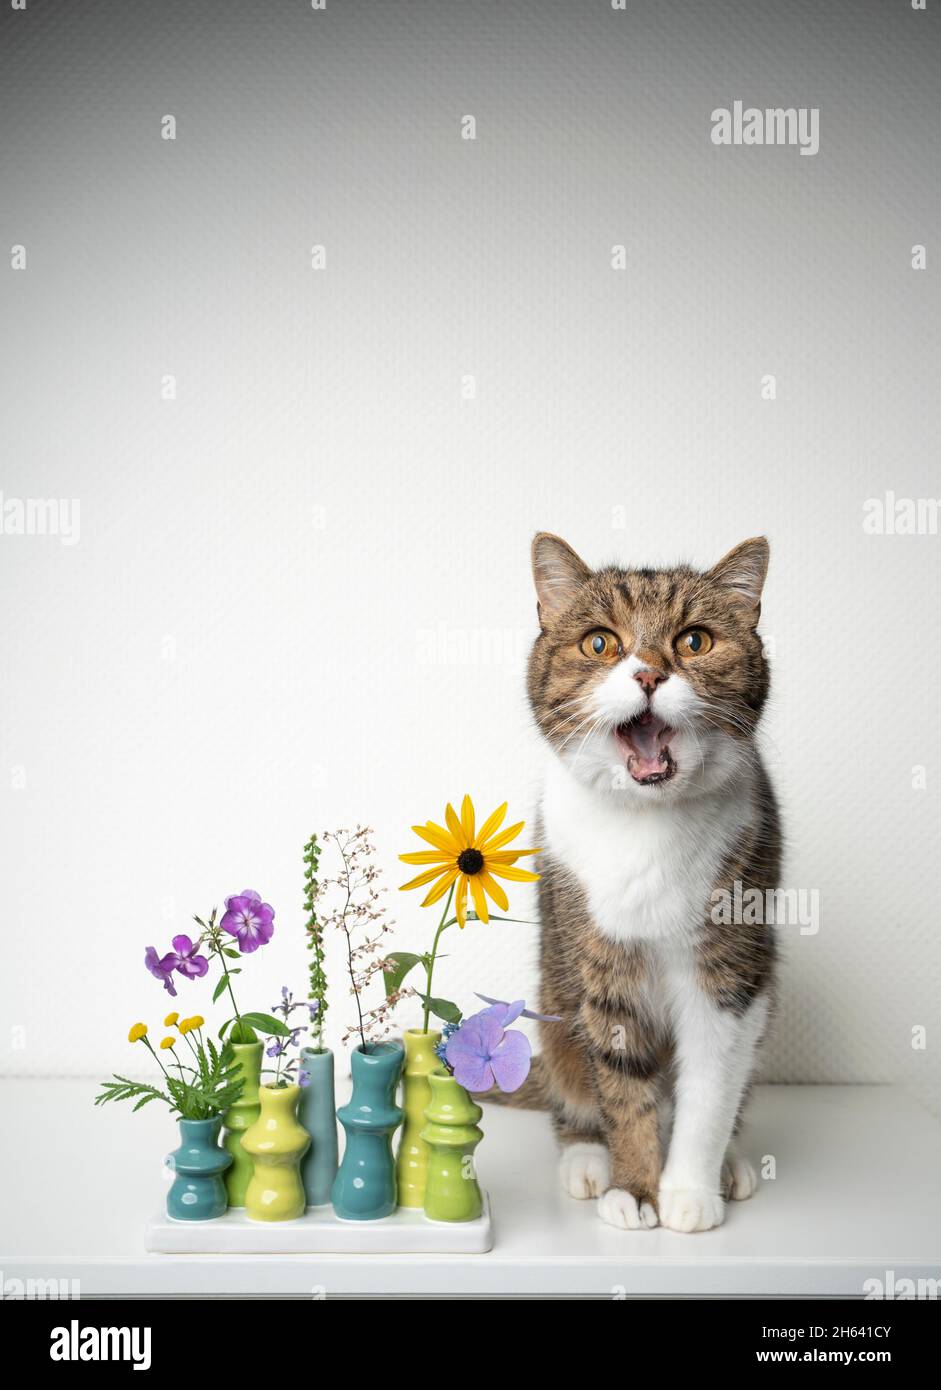 tabby white cat sitting beside flower vase with different potentially toxic plants looking at camera shocked with mouth open Stock Photo